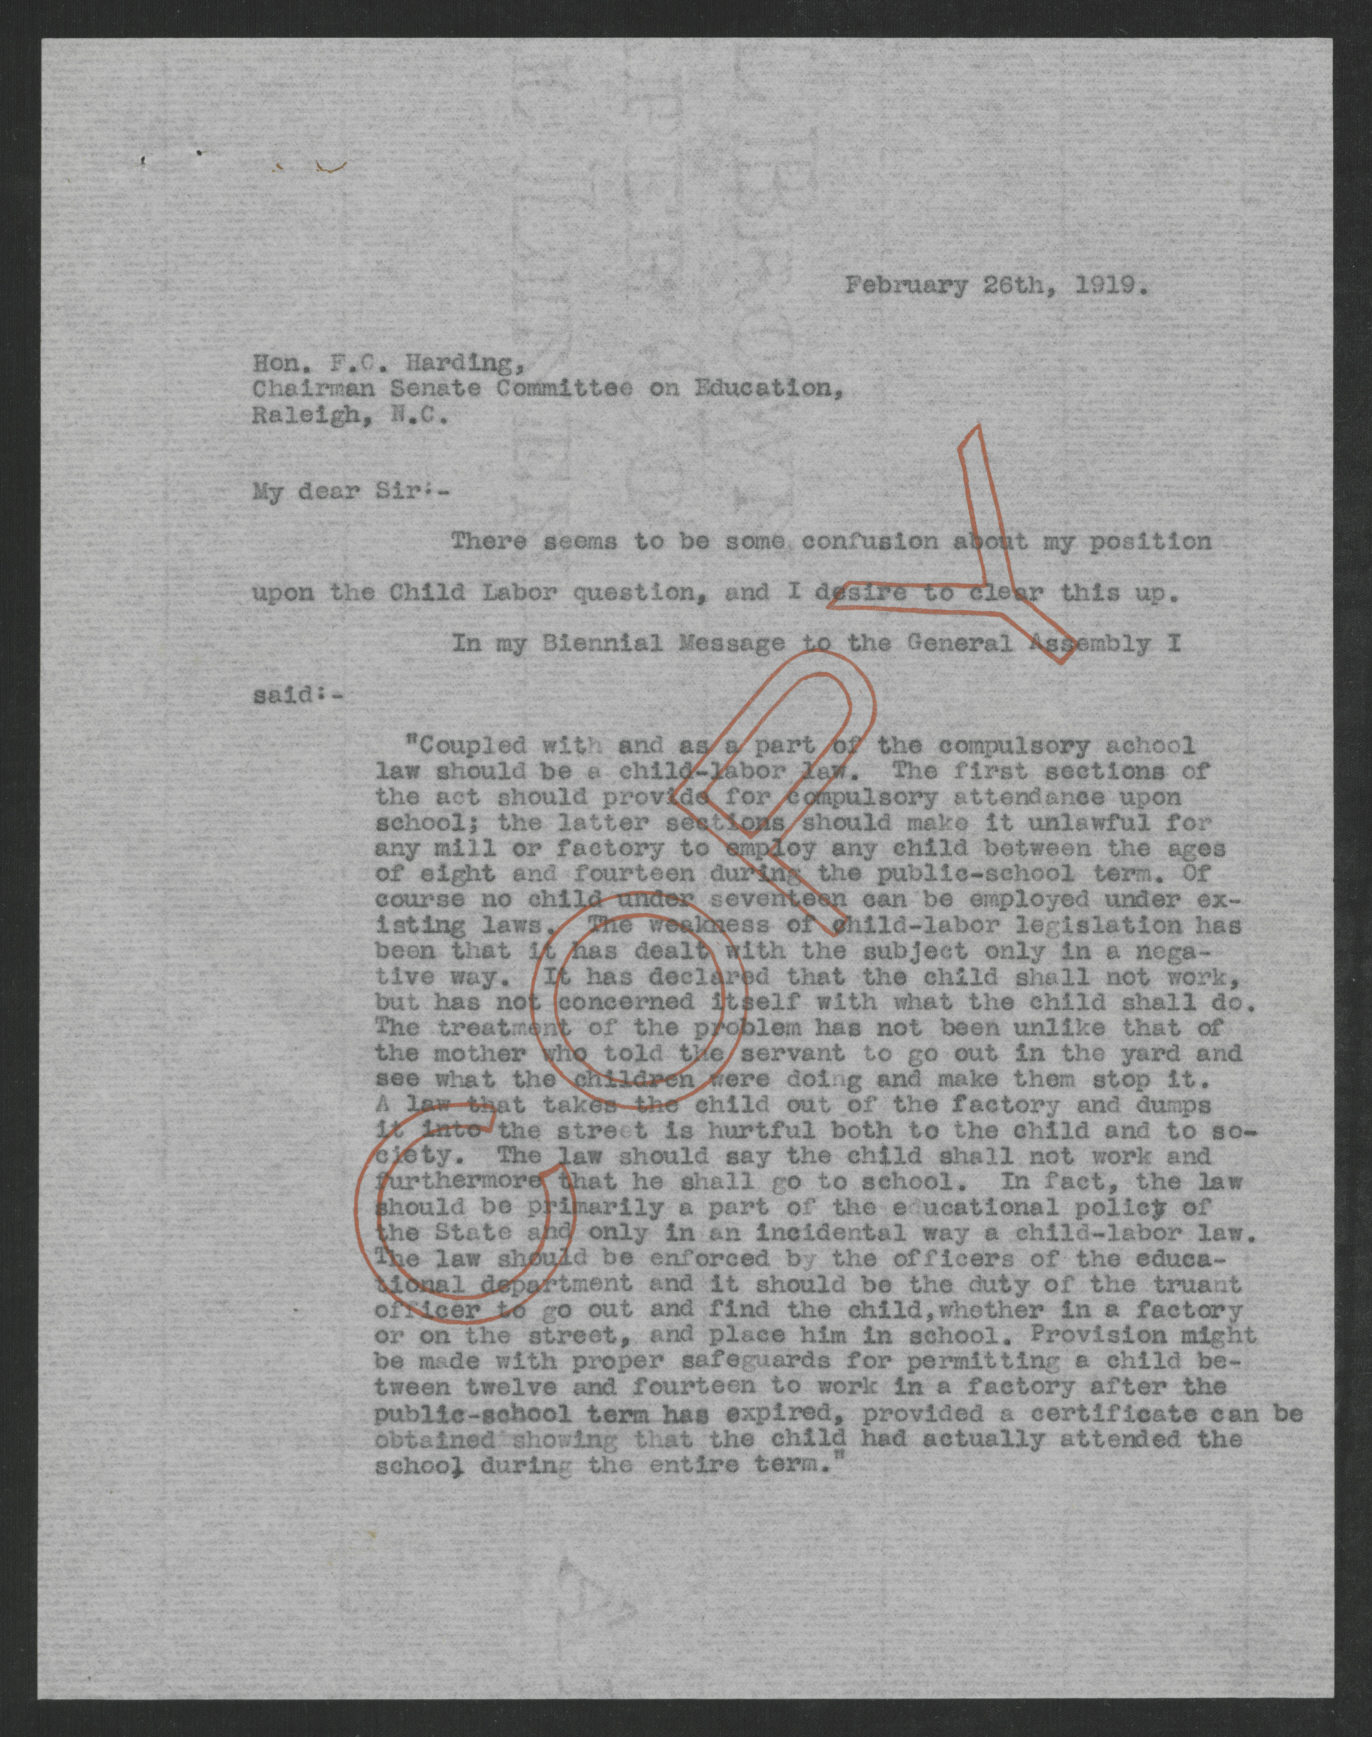 Letter from Thomas W. Bickett to Fordyce C. Harding, February 26, 1919, page 1